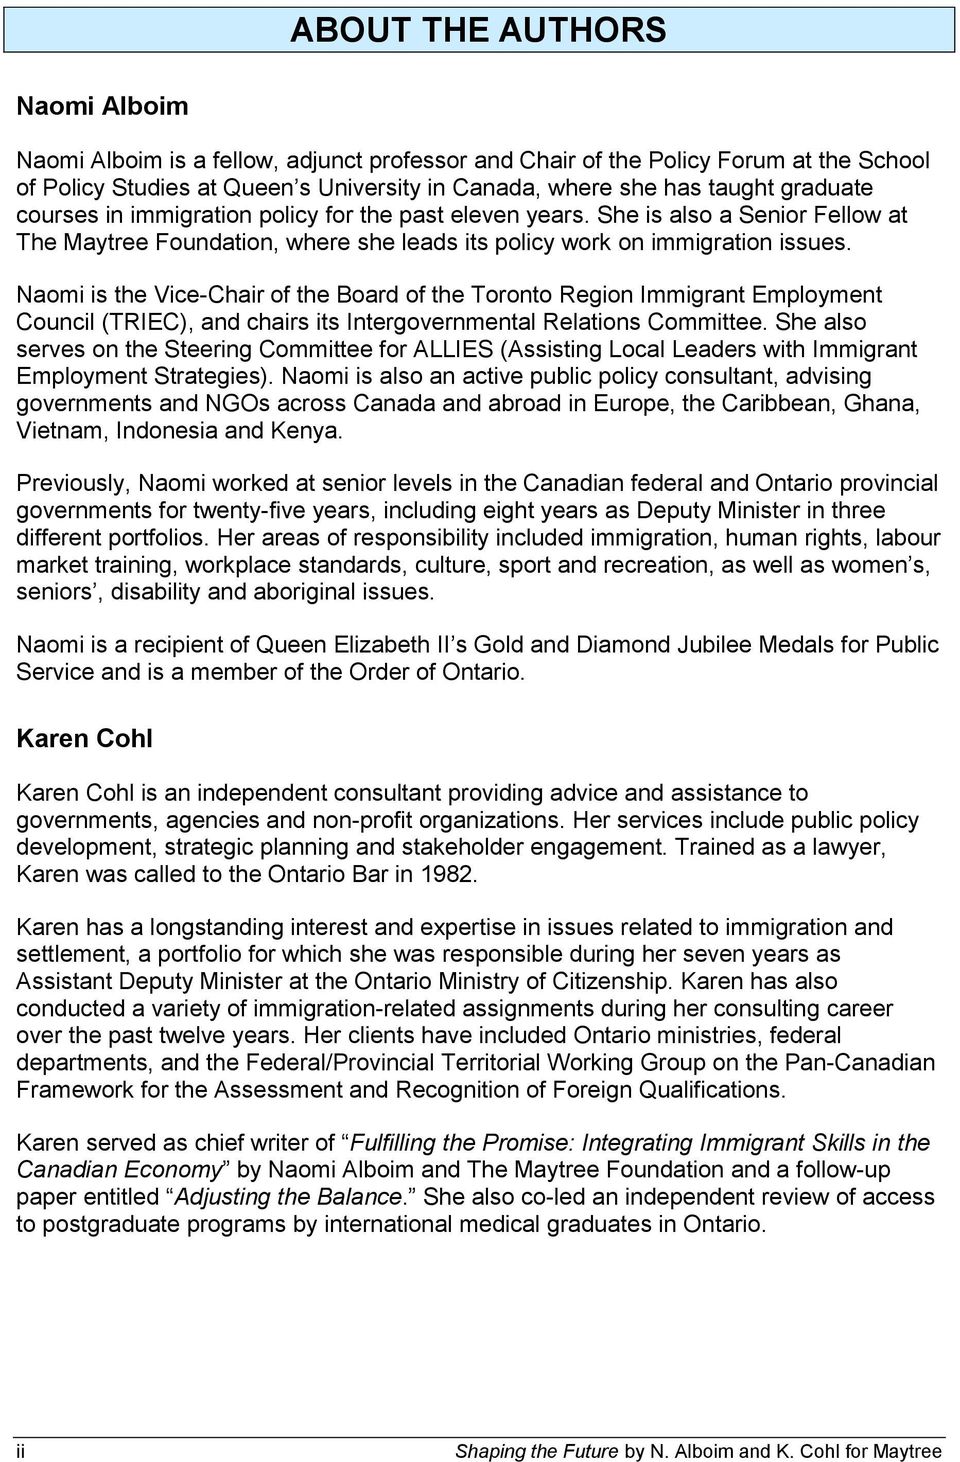 Naomi is the Vice-Chair of the Board of the Toronto Region Immigrant Employment Council (TRIEC), and chairs its Intergovernmental Relations Committee.